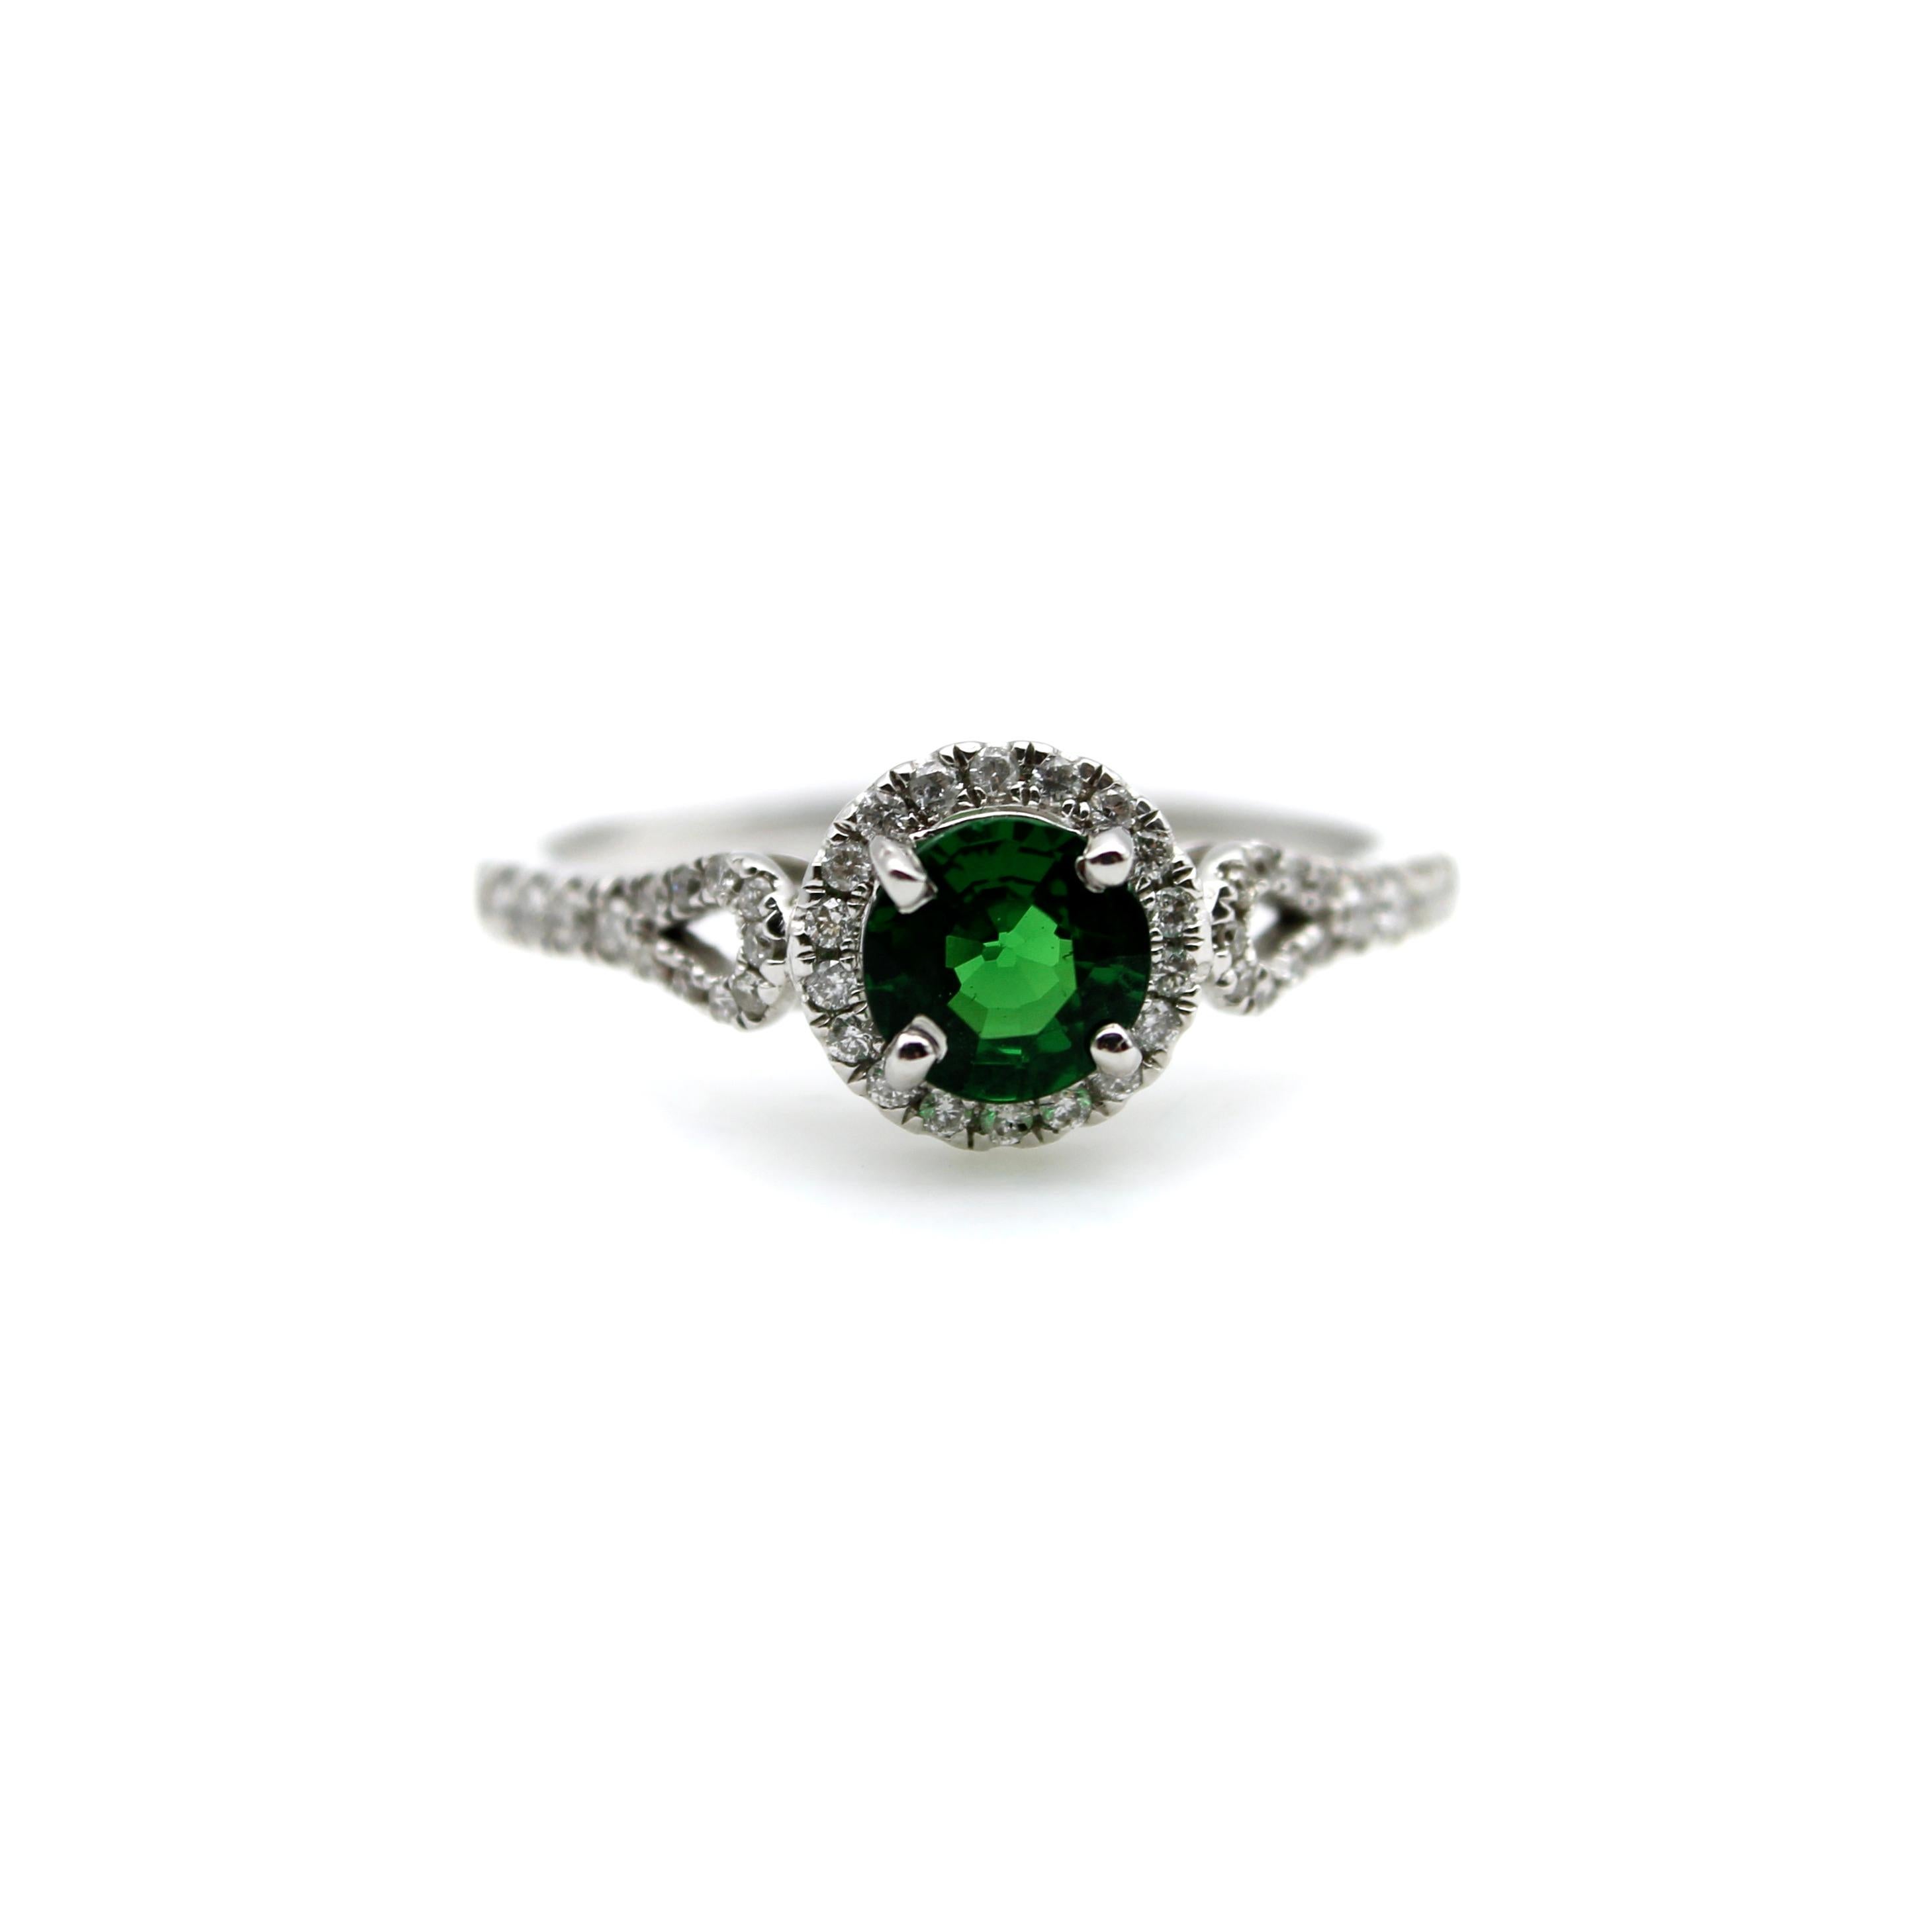 This gorgeous 14k white gold ring features a vibrant green Tsavorite Garnet, surrounded by a halo of diamonds. The green gemstone is a deep, yet bright, green that reflects the light beautifully, and its color pops against the white backdrop of